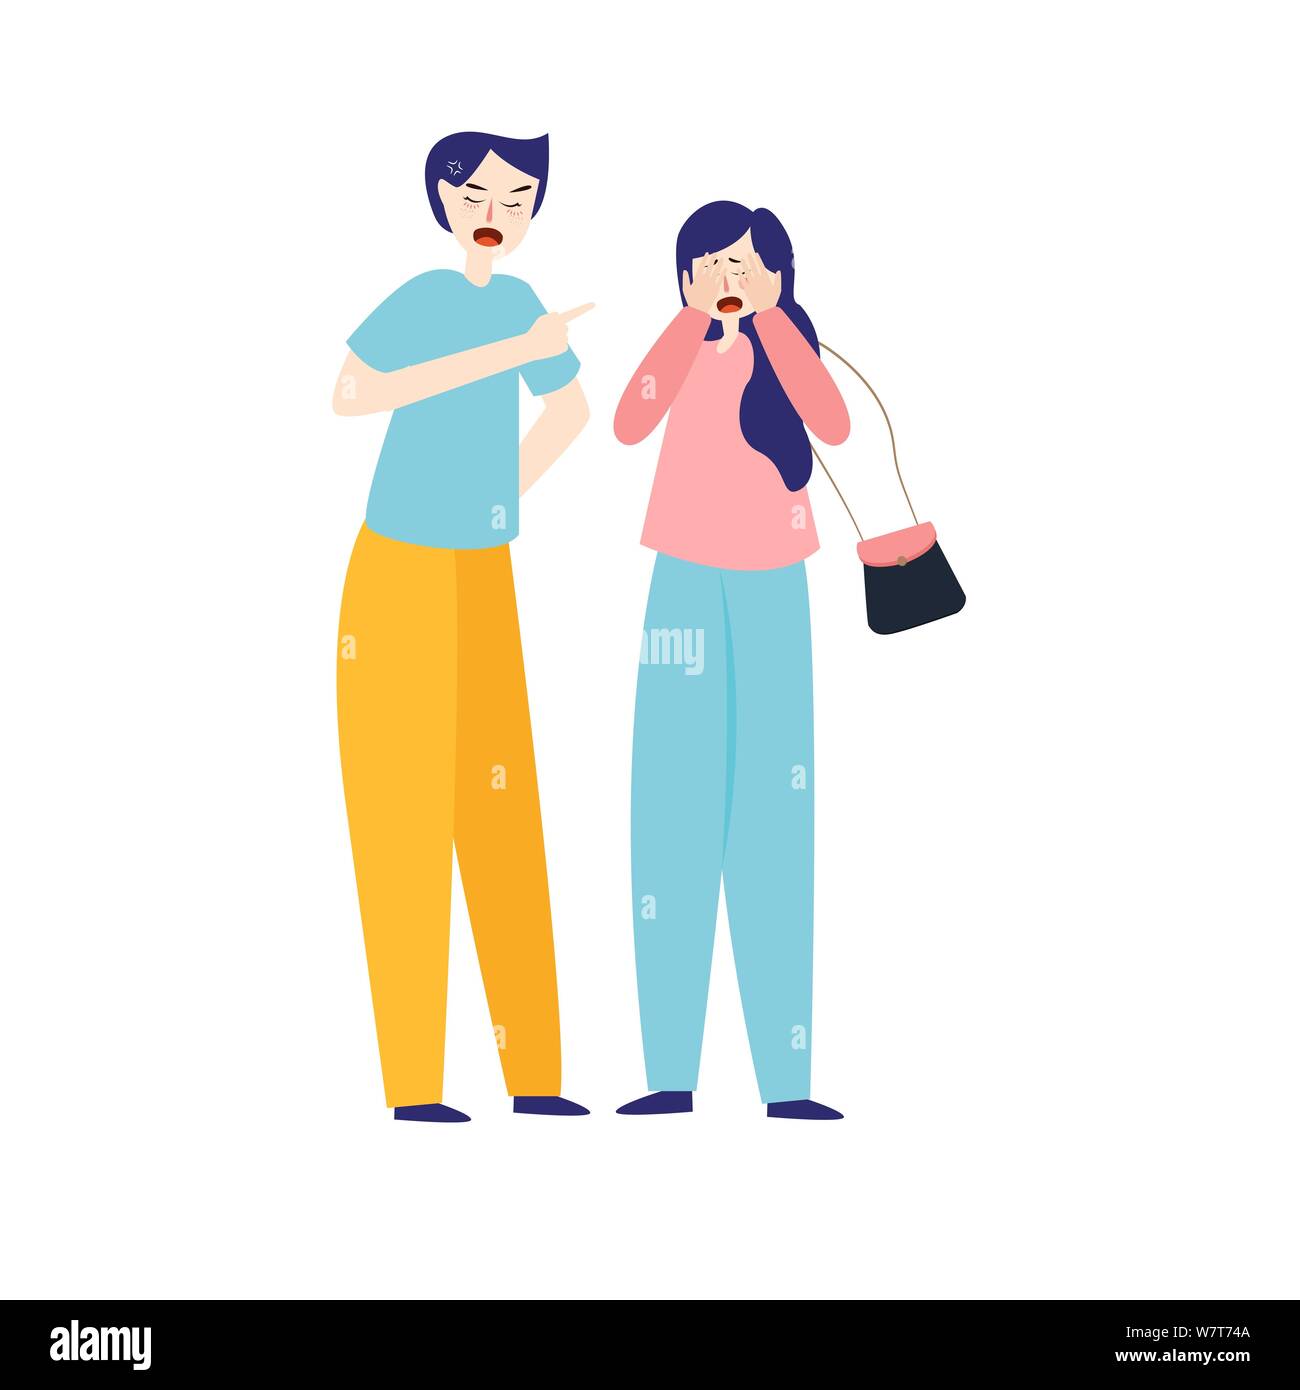 Angry young couple fighting and shouting at each other, people arguing and yelling, cartoon illustration. Stock Vector